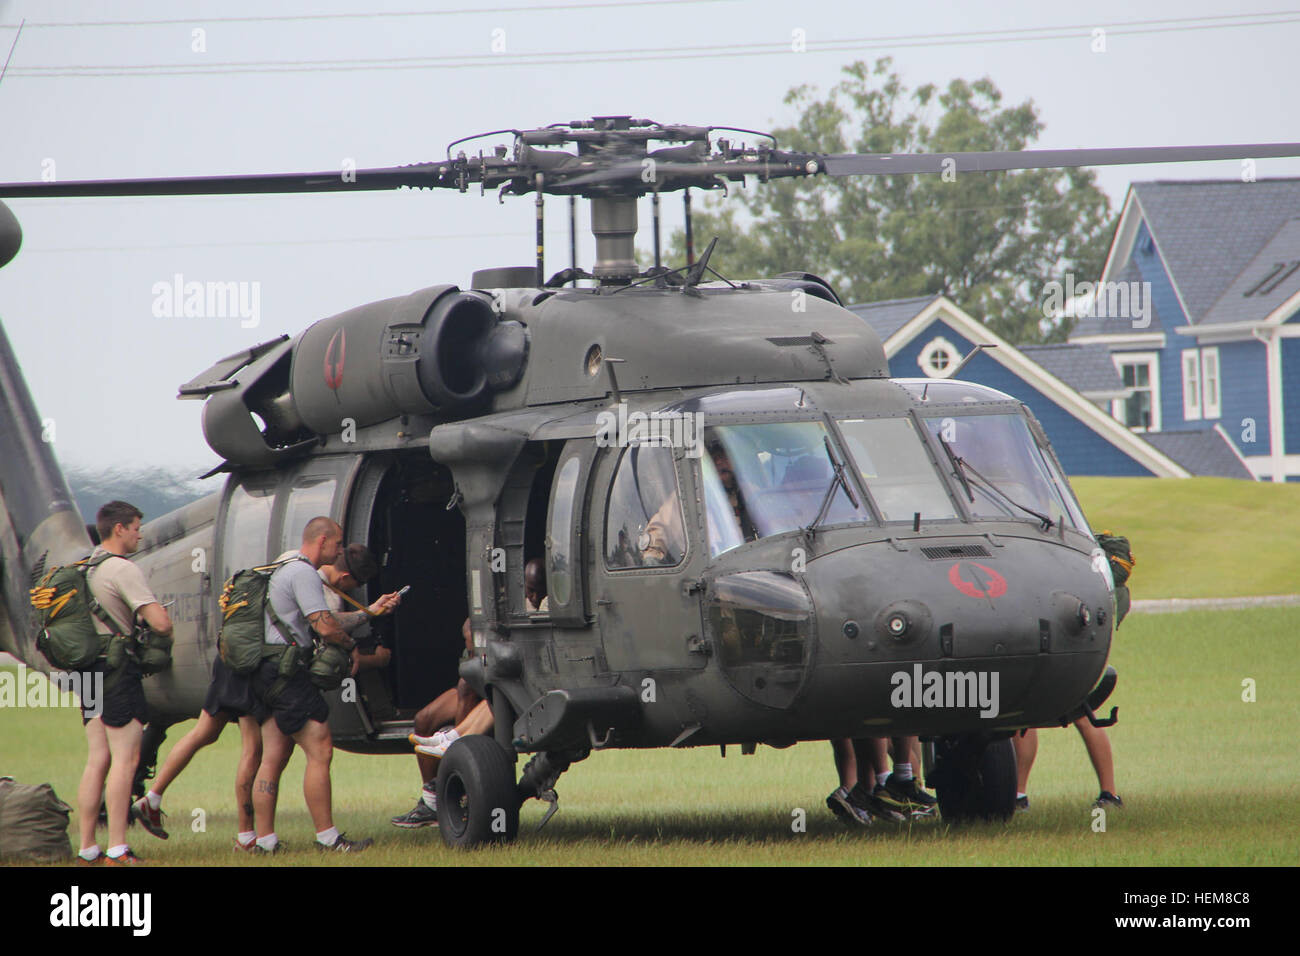 Pictured here the 4th Military Information Support Group (Airborne) UH-60 Black Hawk preparing for take-off. 4th MISG (A) UH-60 water jump 120725-A-MY599-308 Stock Photo